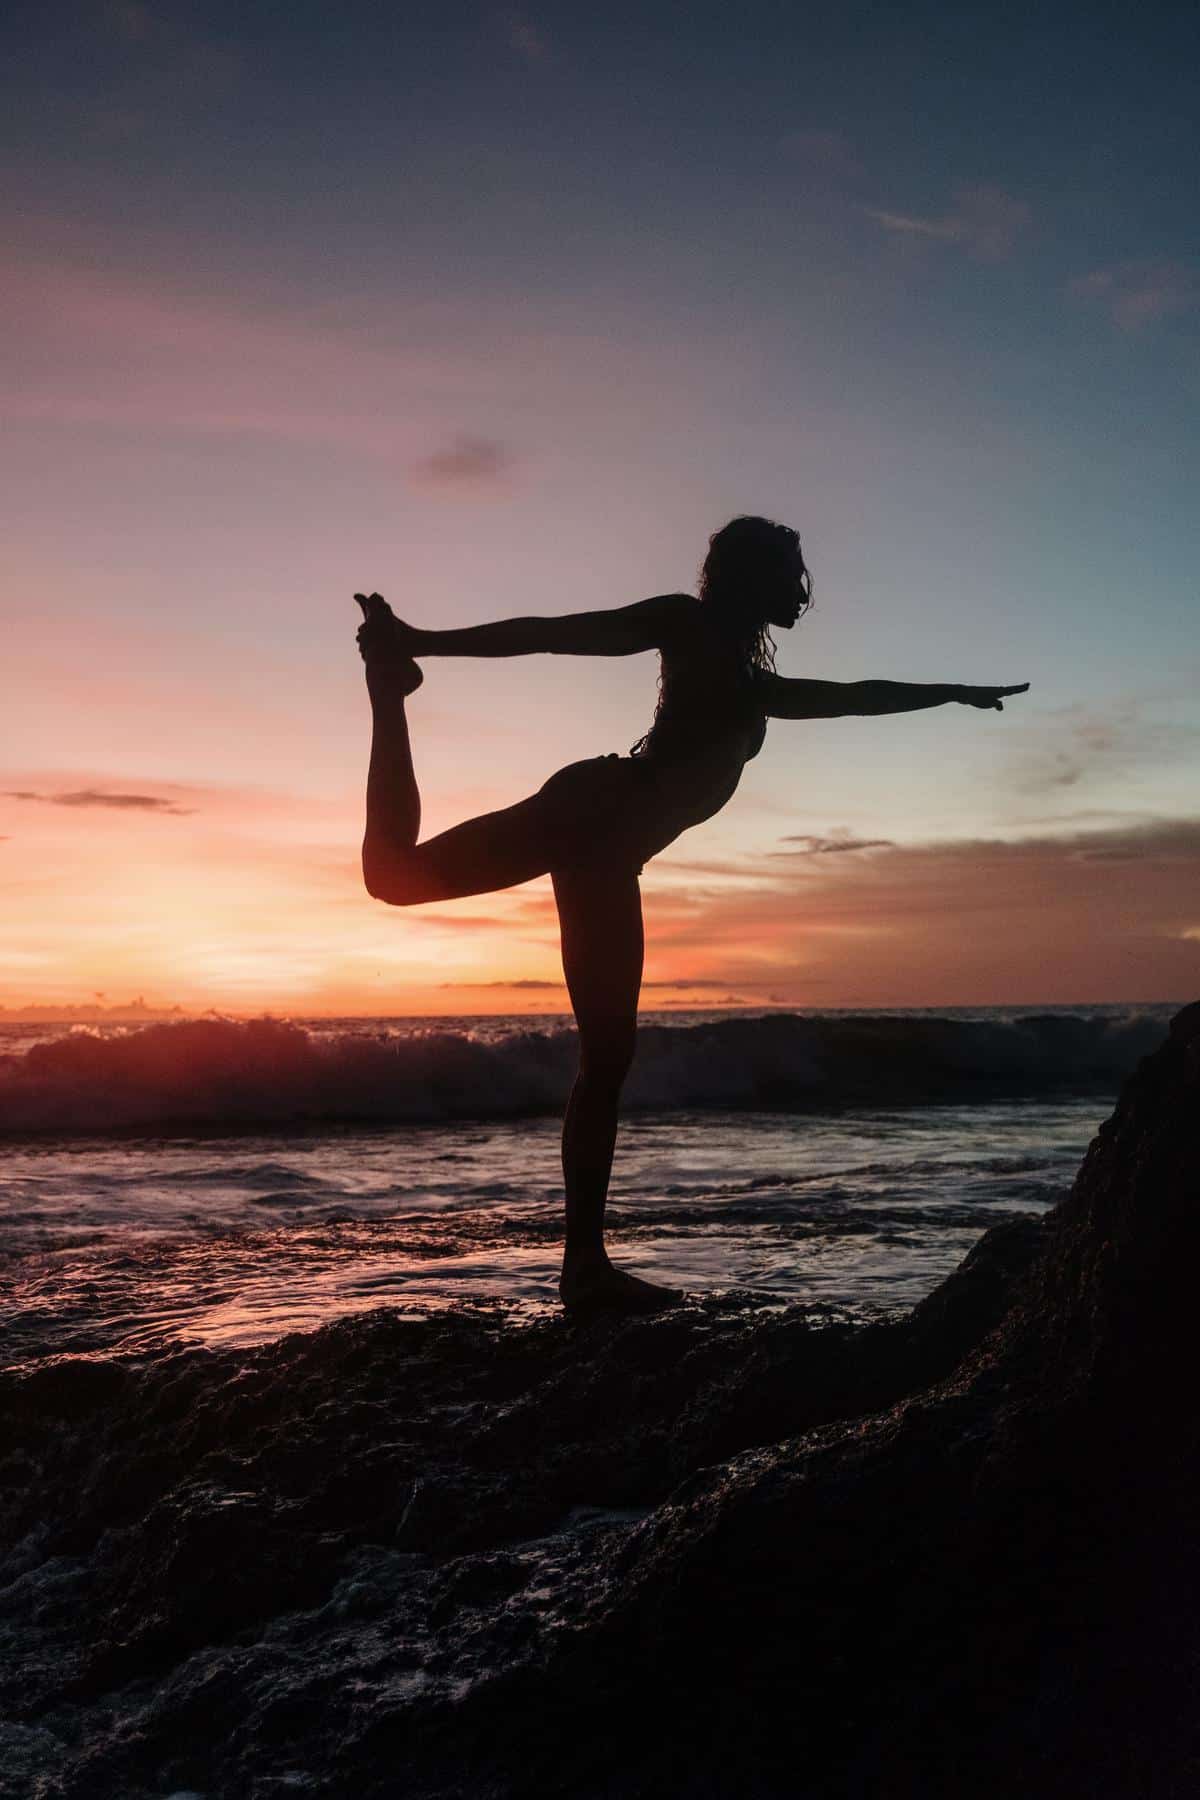 Illustration of a person performing a yoga pose on a mountain peak with a sunset background, representing balance and flexibility in adventure travel.